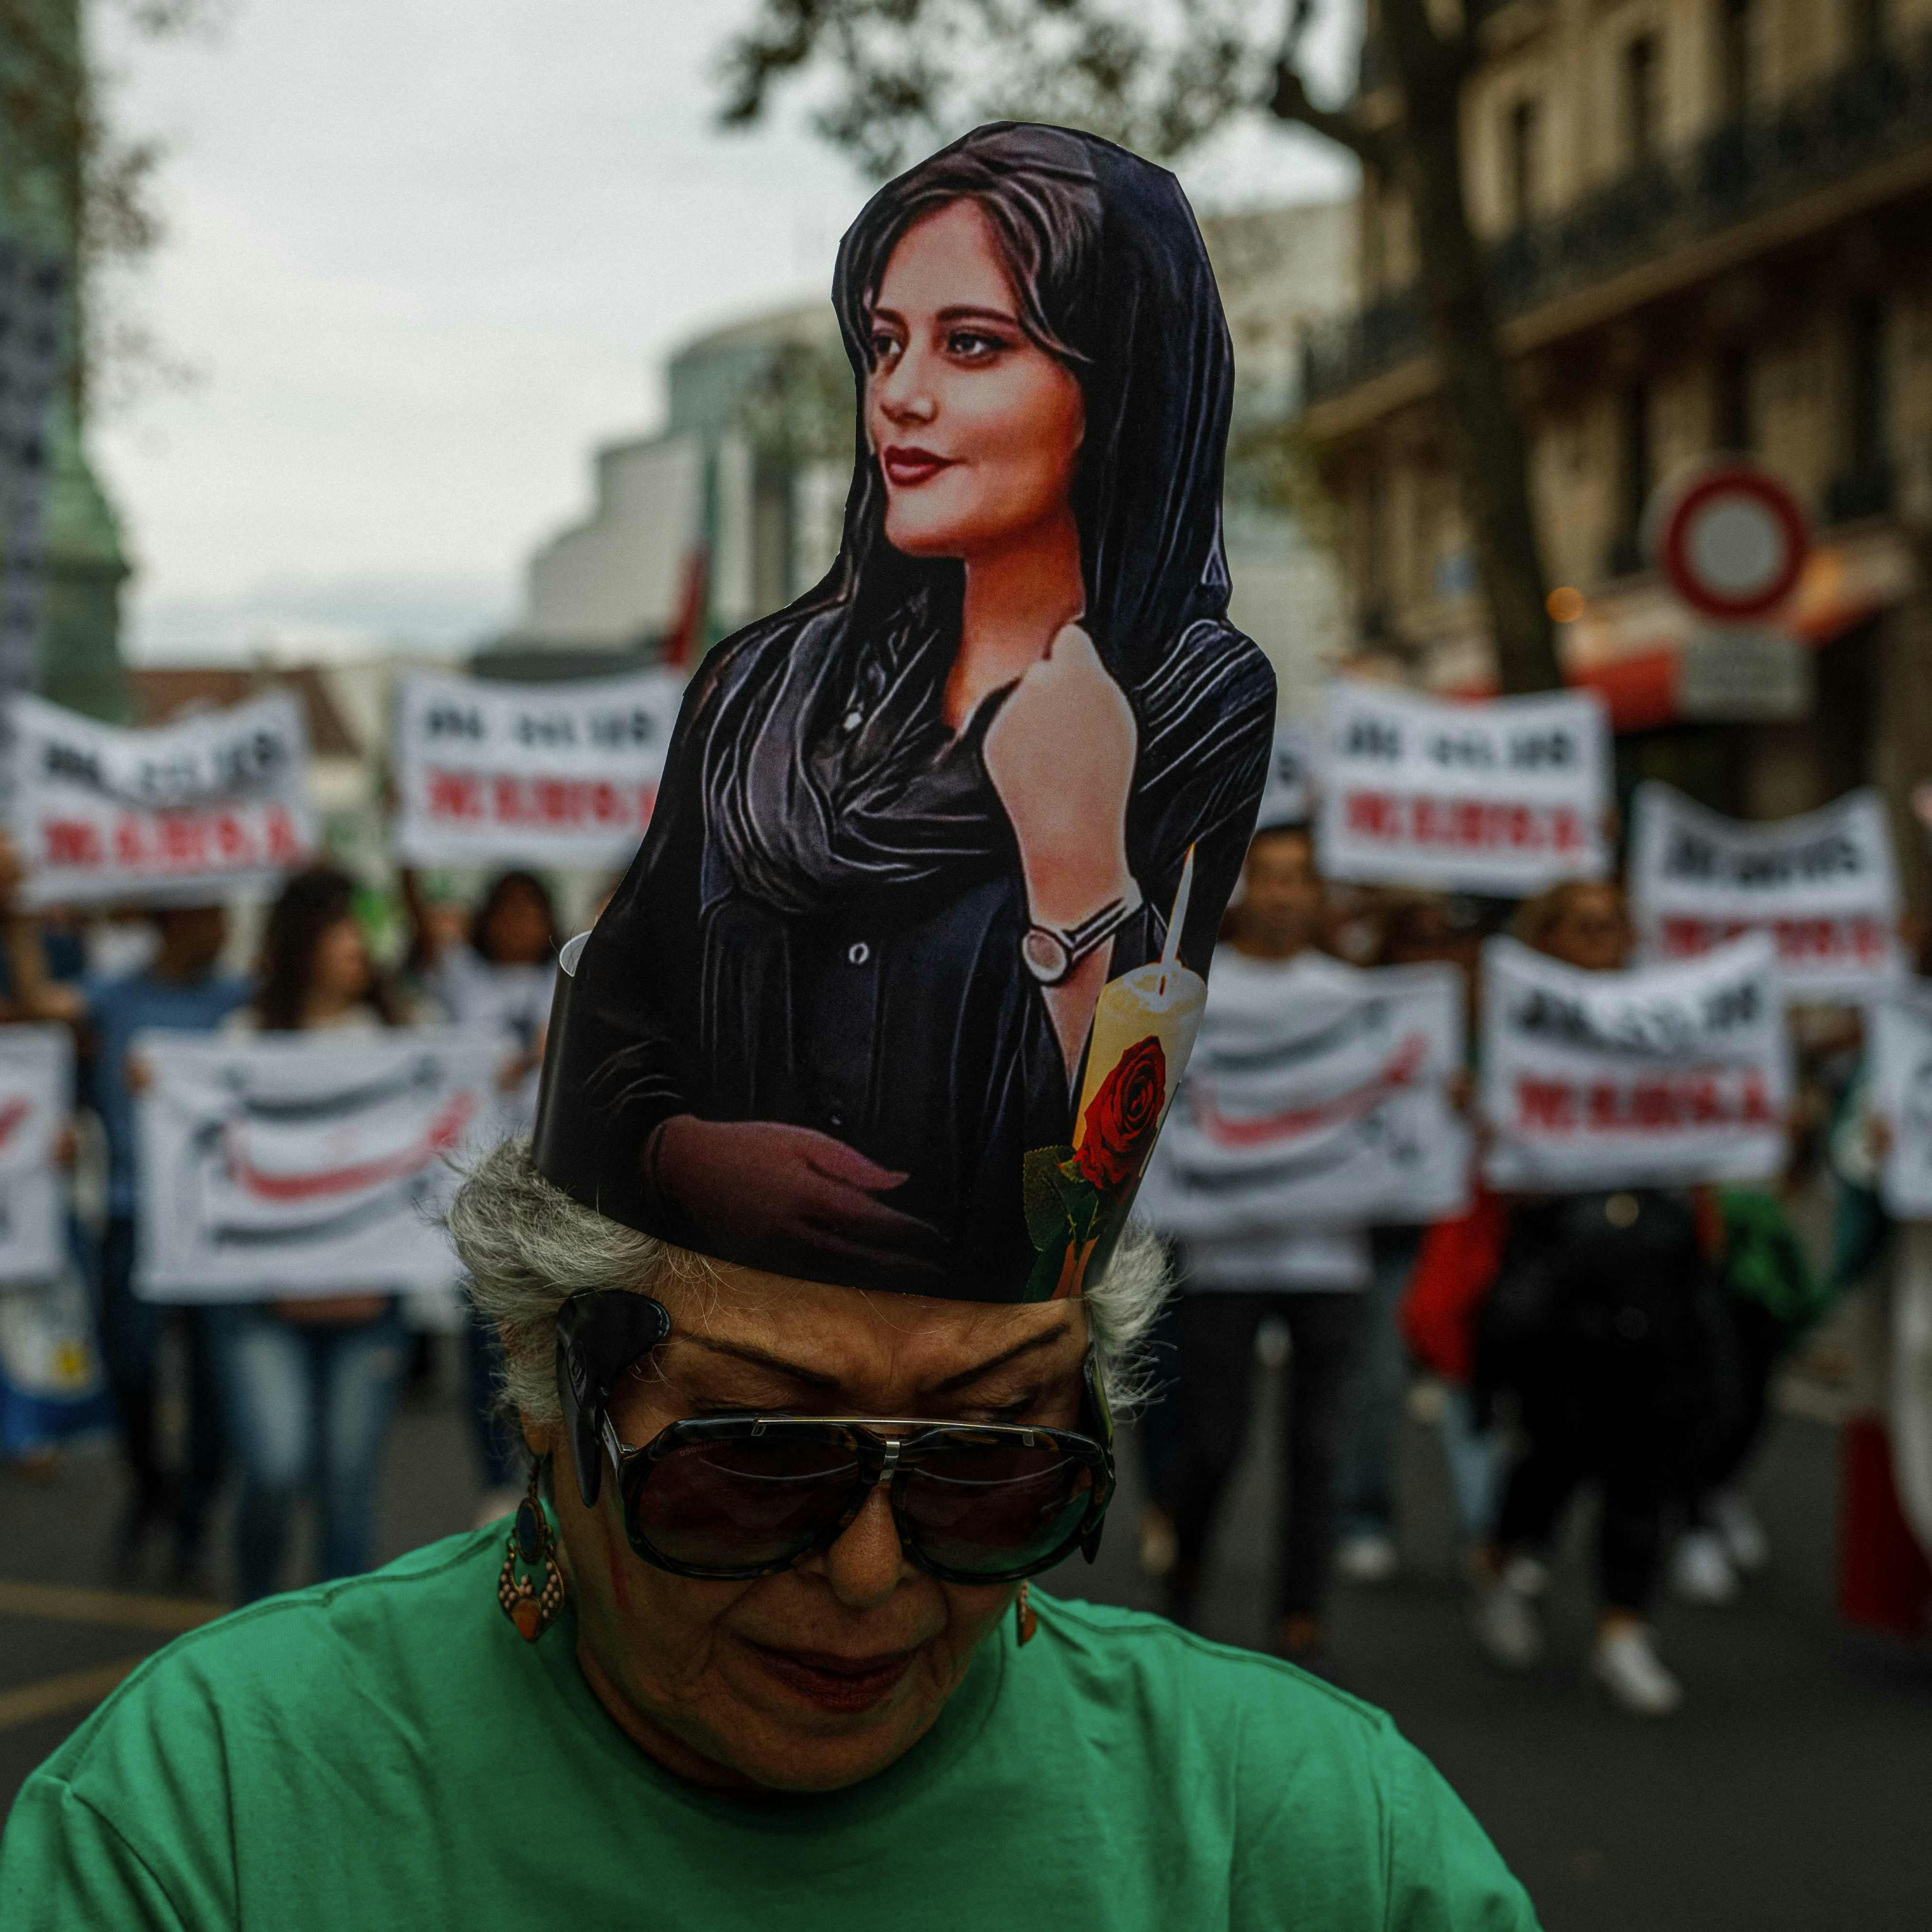 TOPSHOT - Demonstrators attend a protest against the Iranian regime at Place de la Bastille in Paris on September 16, 2023, on the first anniversary of the death of Mahsa Amini in Iran. Mahsa Amini, a 22-year-old Iranian Kurd, died in police custody on September 16 last year following her arrest for an alleged breach of the Islamic republic's strict dress code for women. (Photo by Dimitar DILKOFF / AFP)